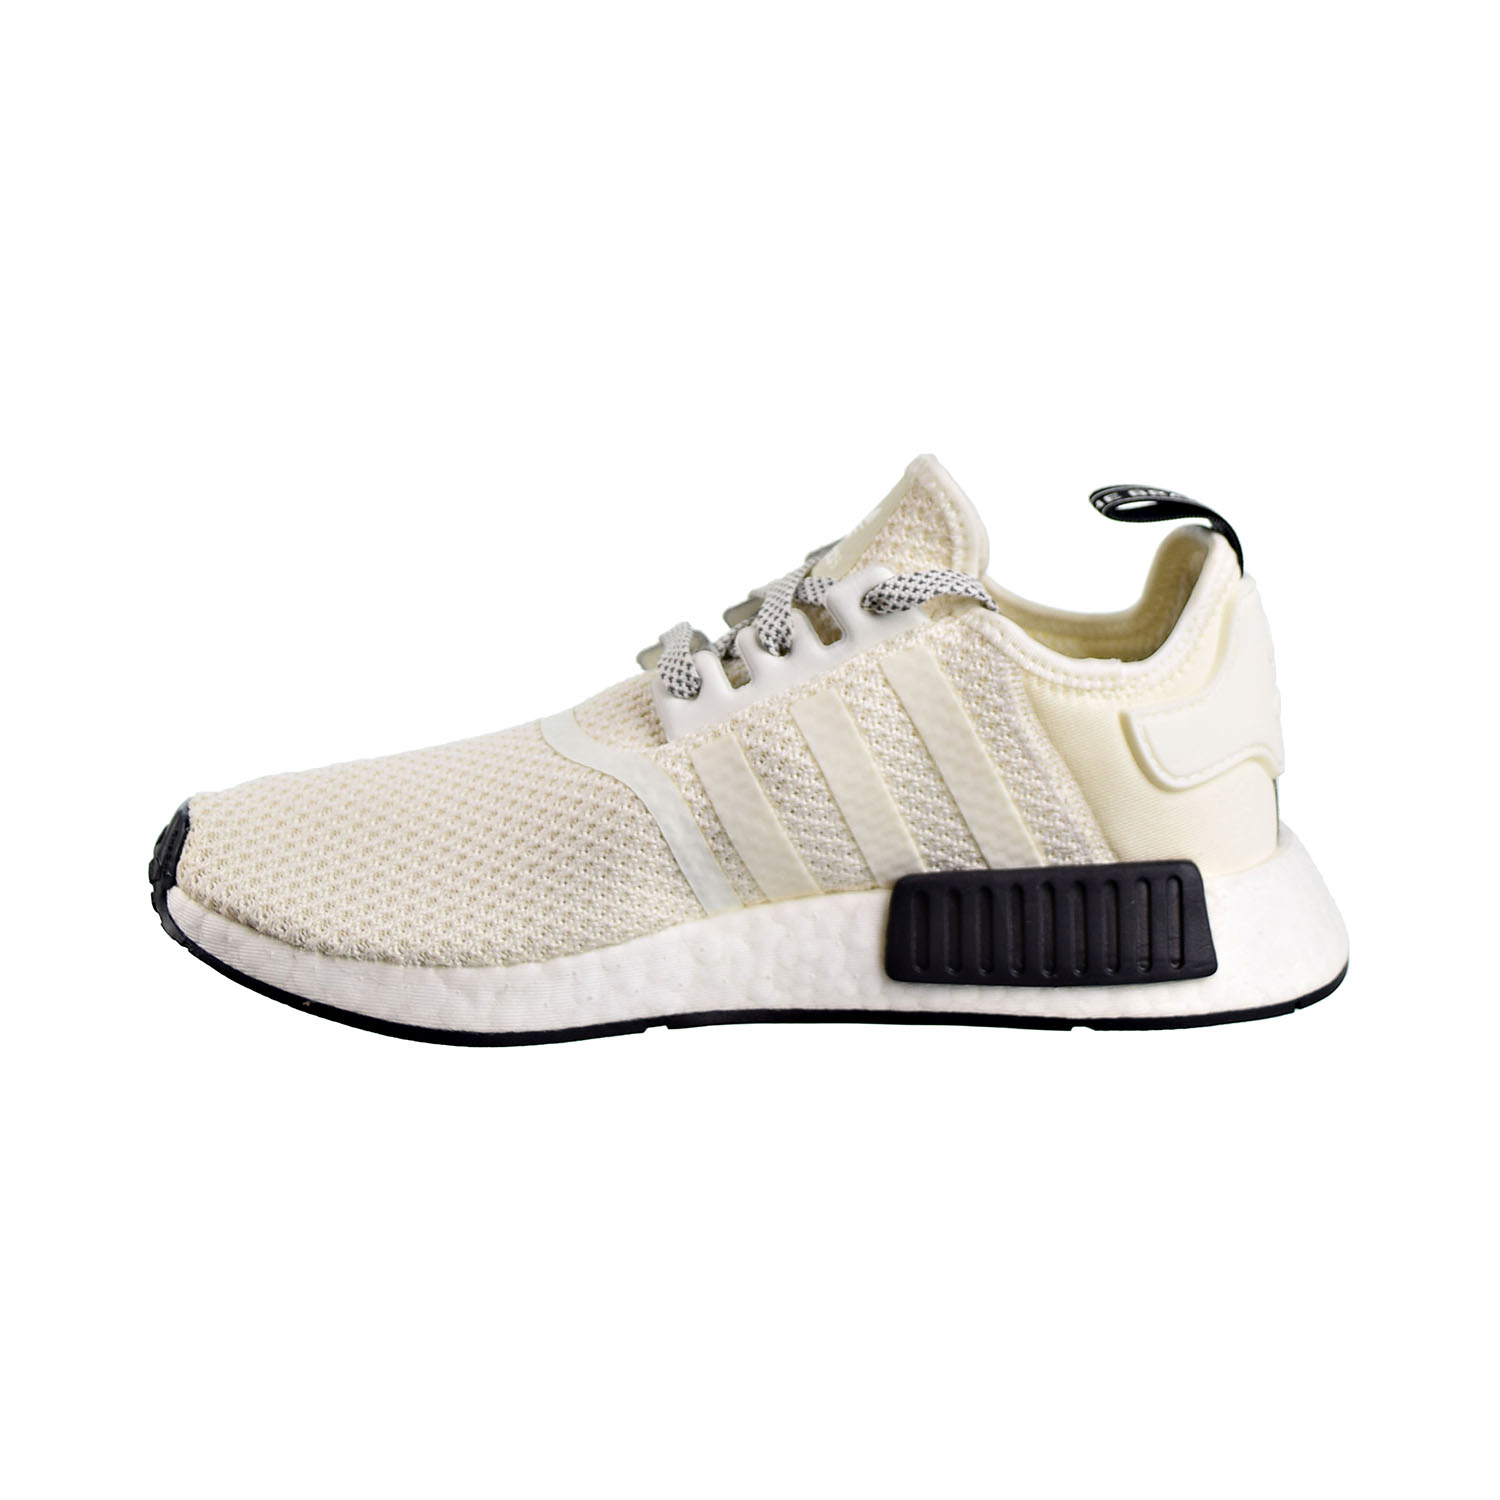 nmd r1 off white carbon core black